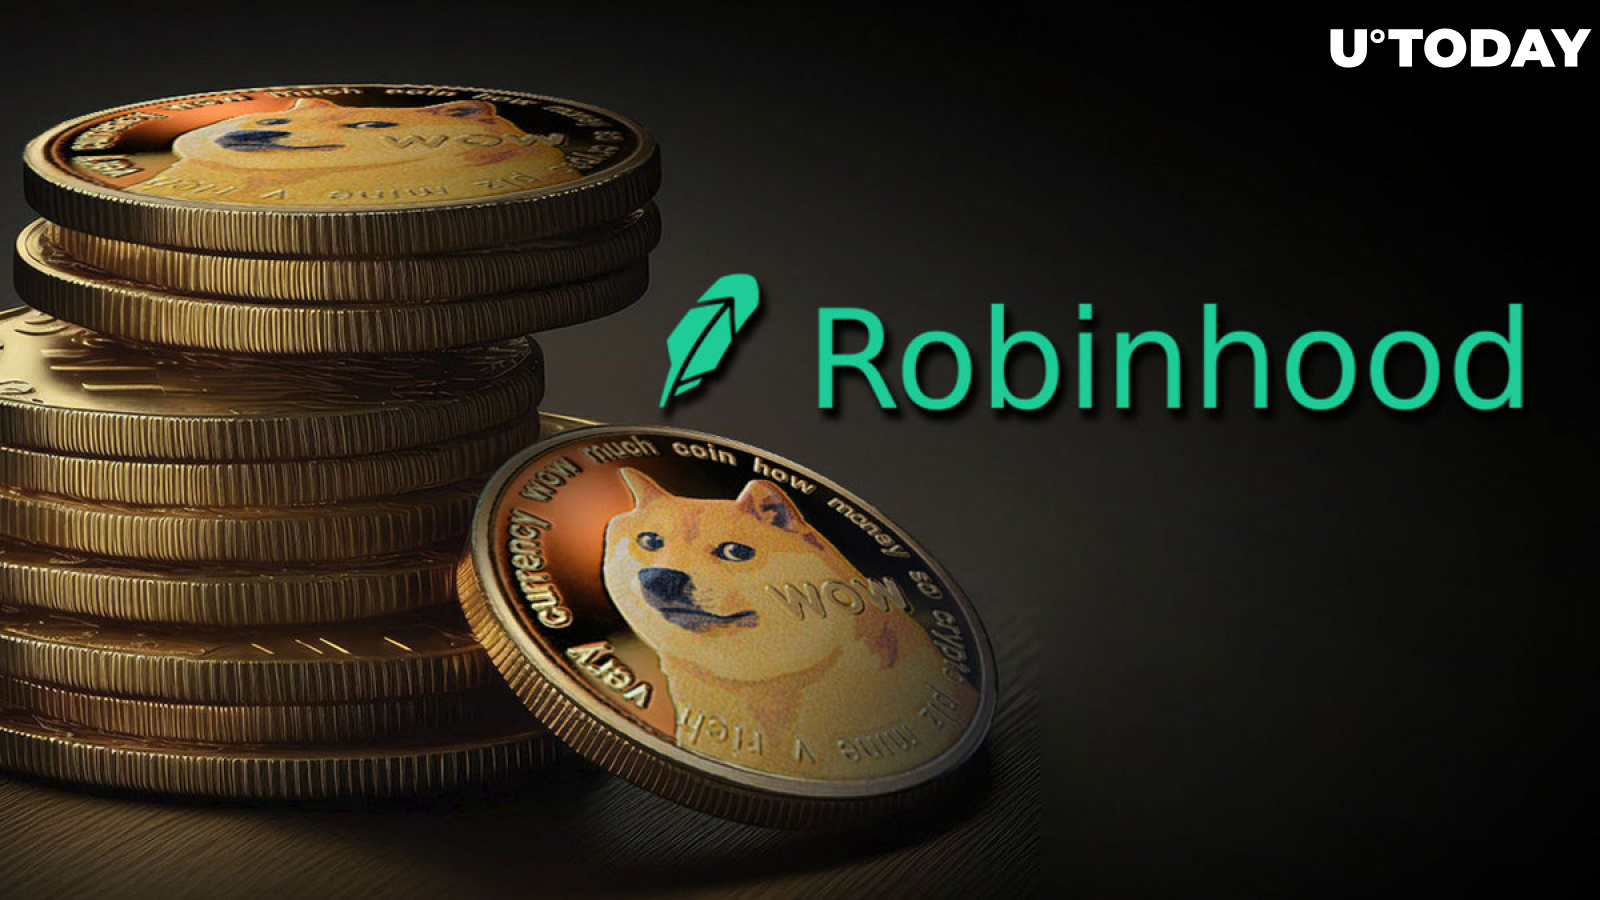 250 Million DOGE Sent to Robinhood, Dogecoin Army Intrigued